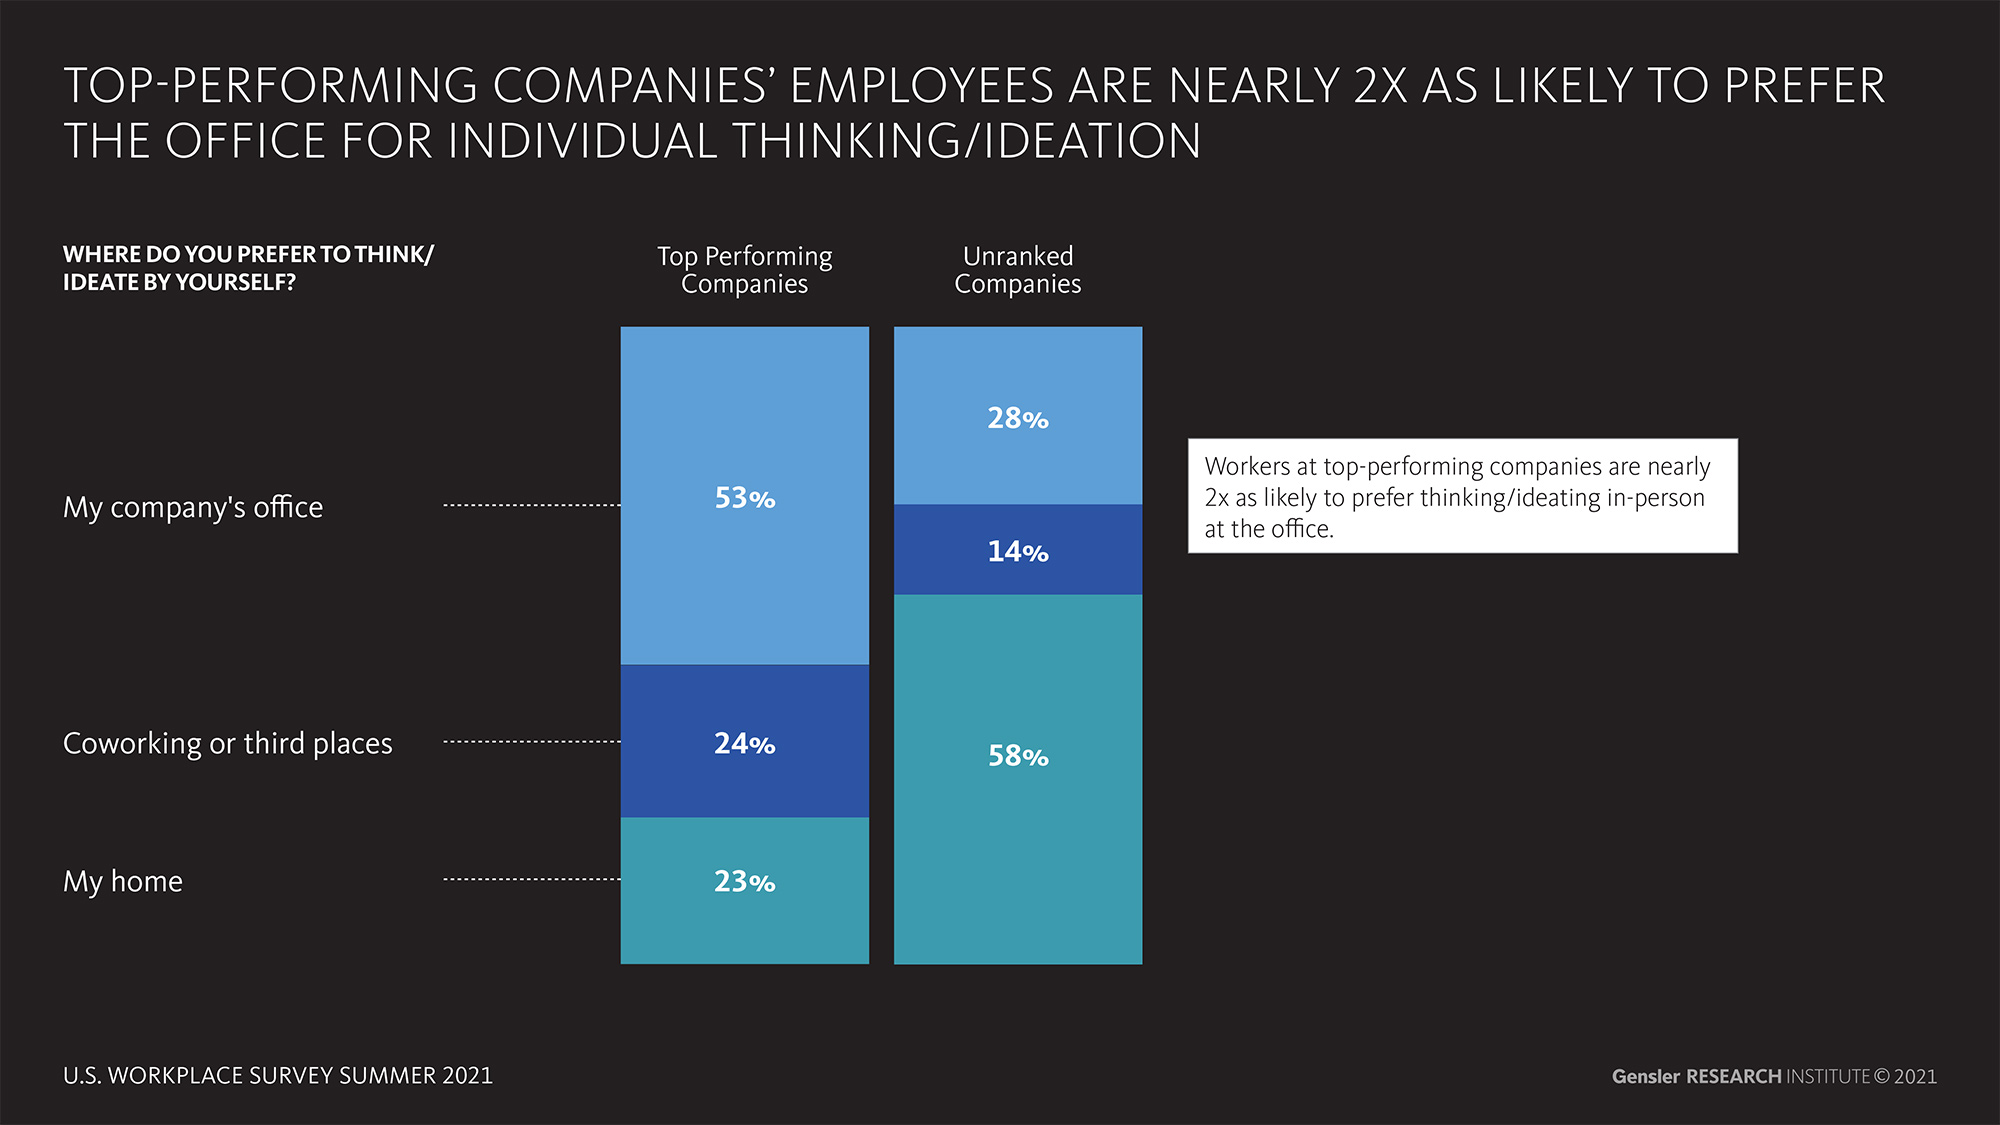 Here’s Why Employees at TopPerforming Companies Need the Office